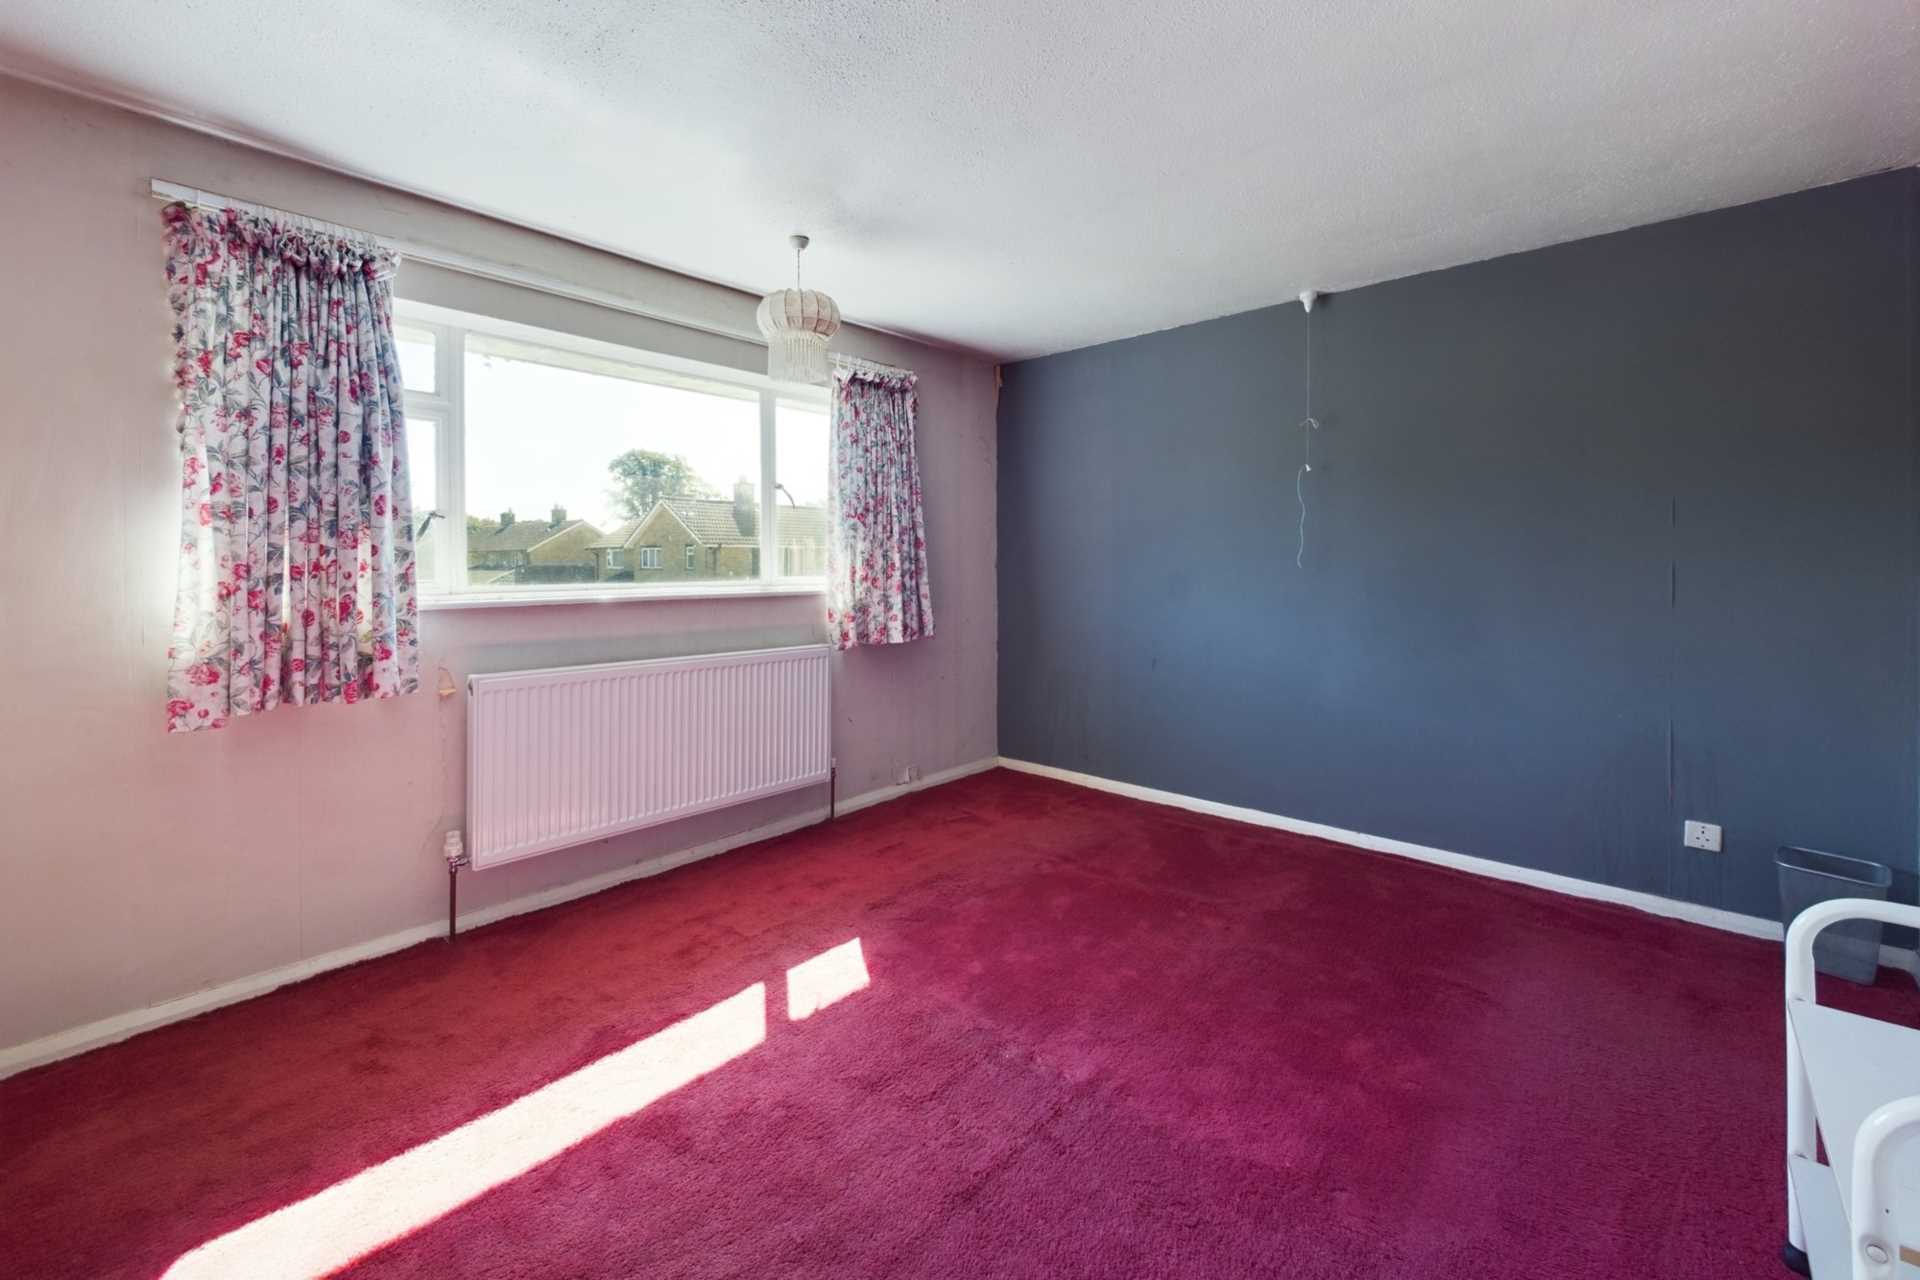 3 BED WITH GARAGE Widmore Drive, ADEYFIELD, Image 8